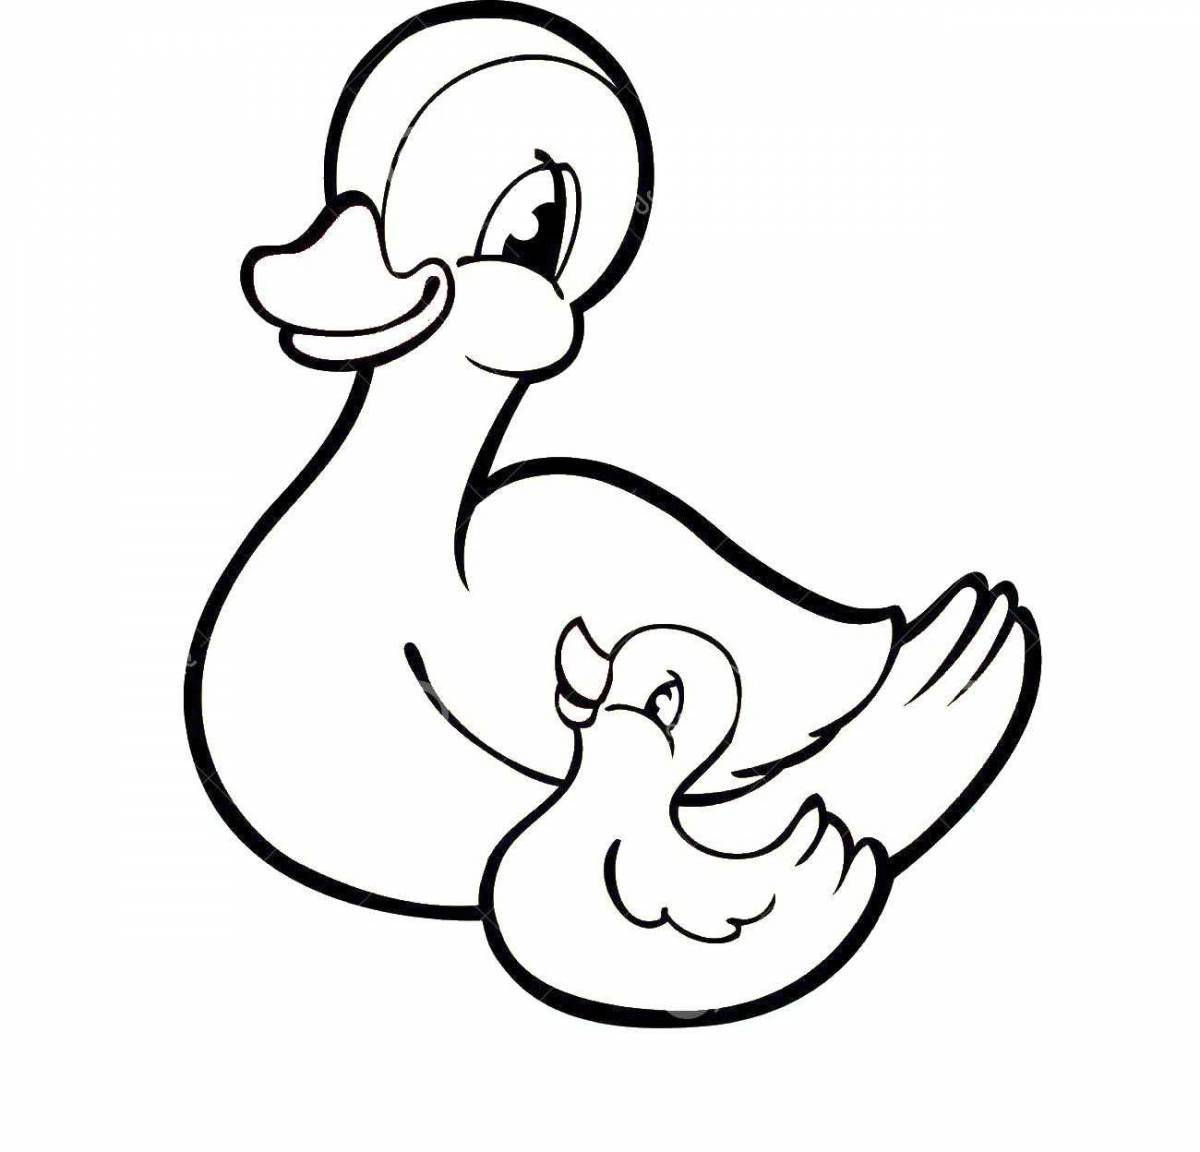 Duck for kids #1